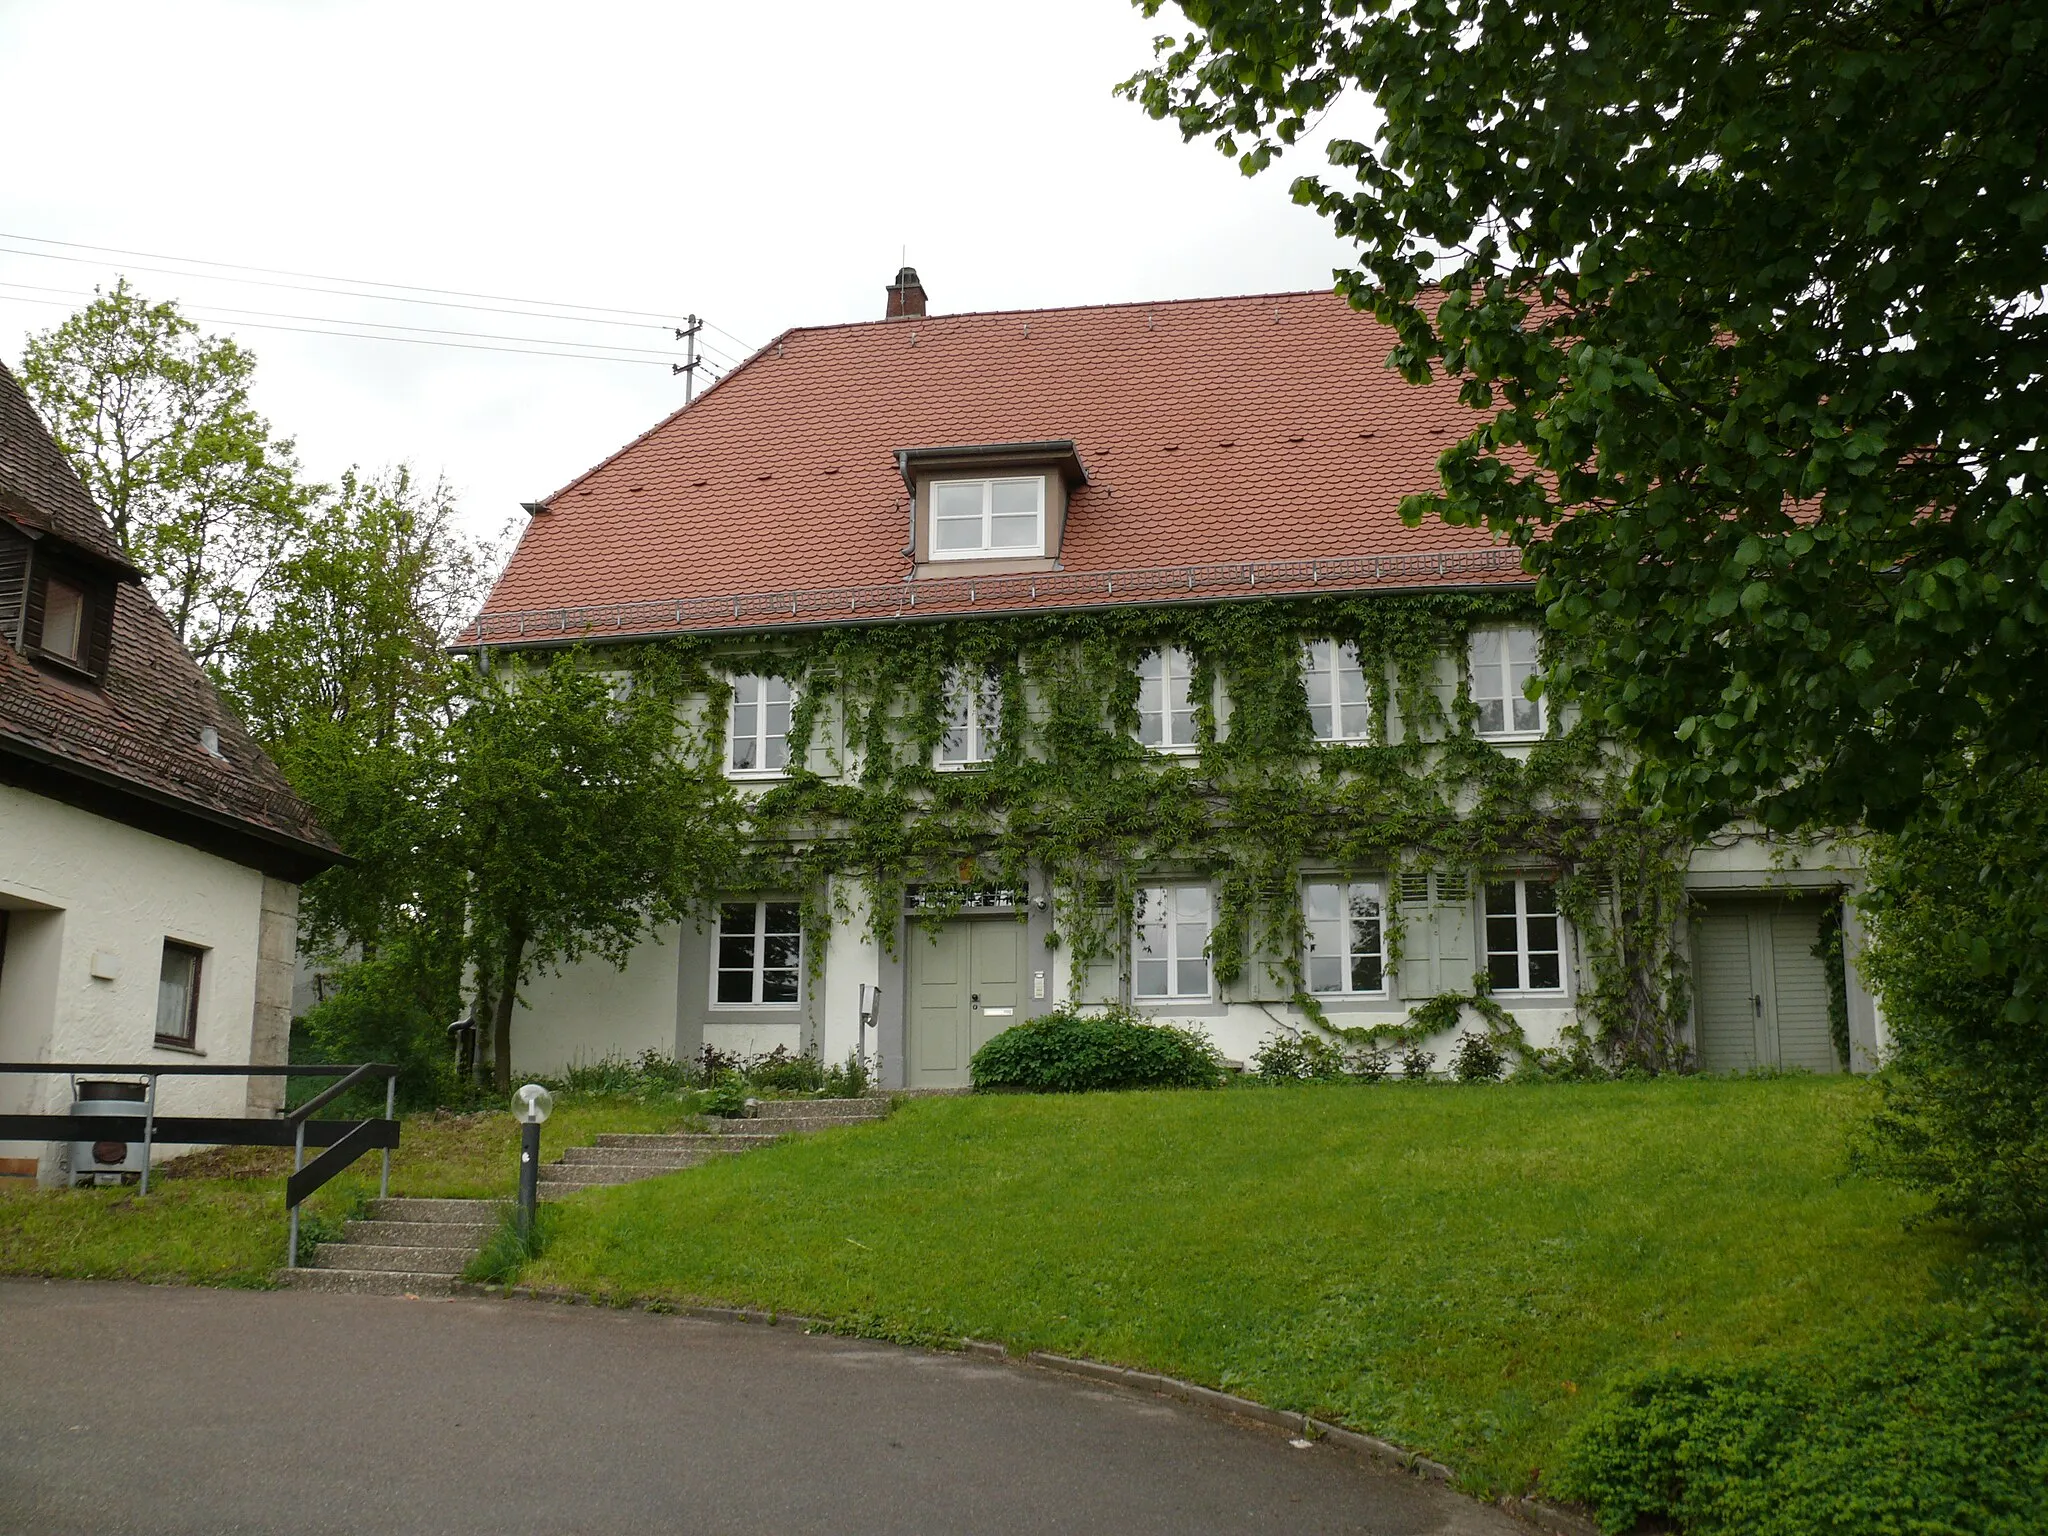 Photo showing: View of the protestant rectory in Söhnstetten (a district of w:Steinheim am Albuch, Baden-Württemberg, Germany), seen from south.